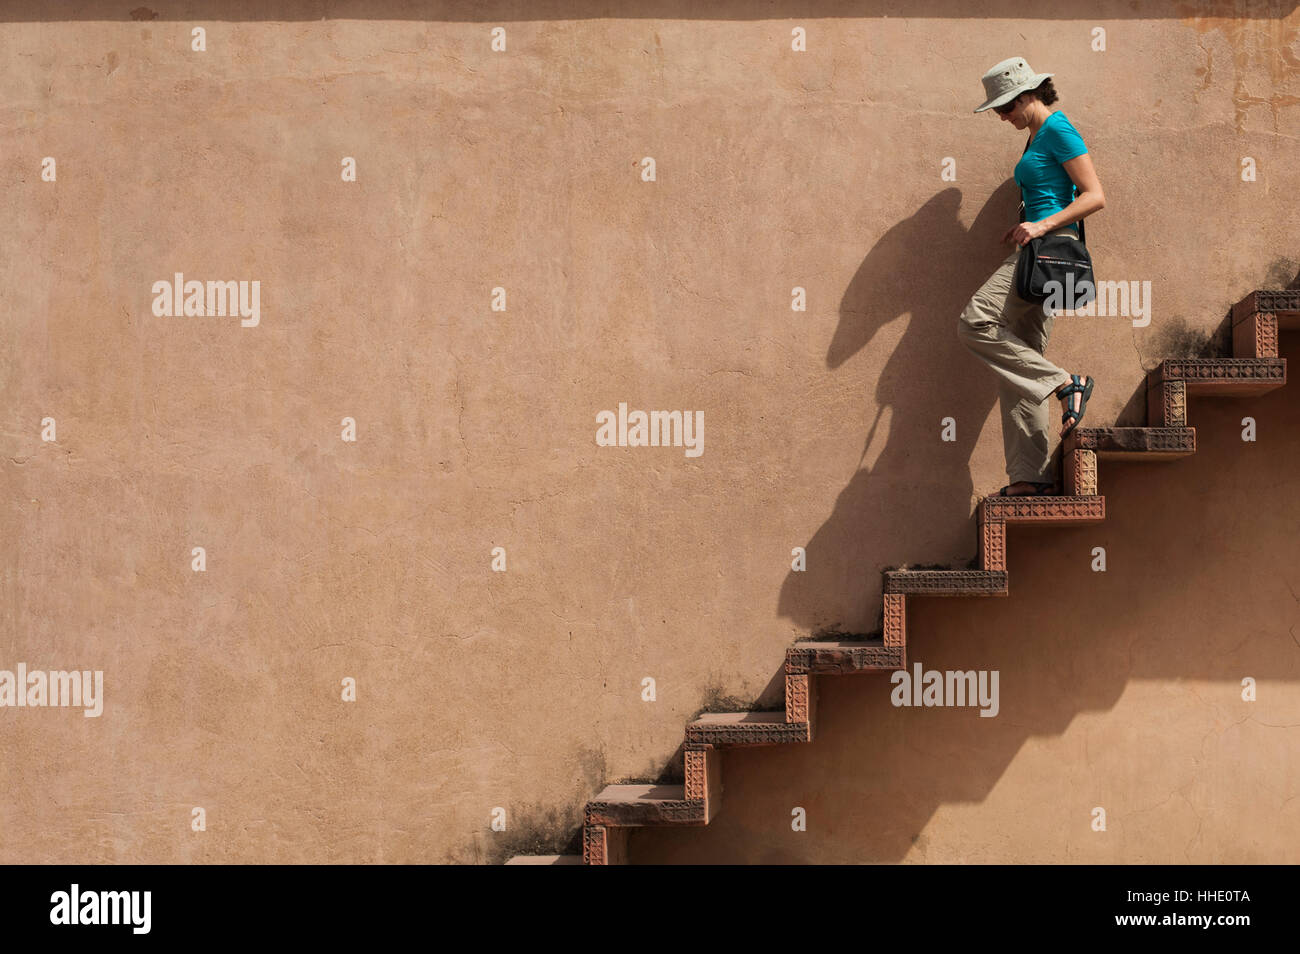 A tourist climbs downs some exposed steps within the Fatehpur Sikri temple complex, Uttar Pradesh, India Stock Photo